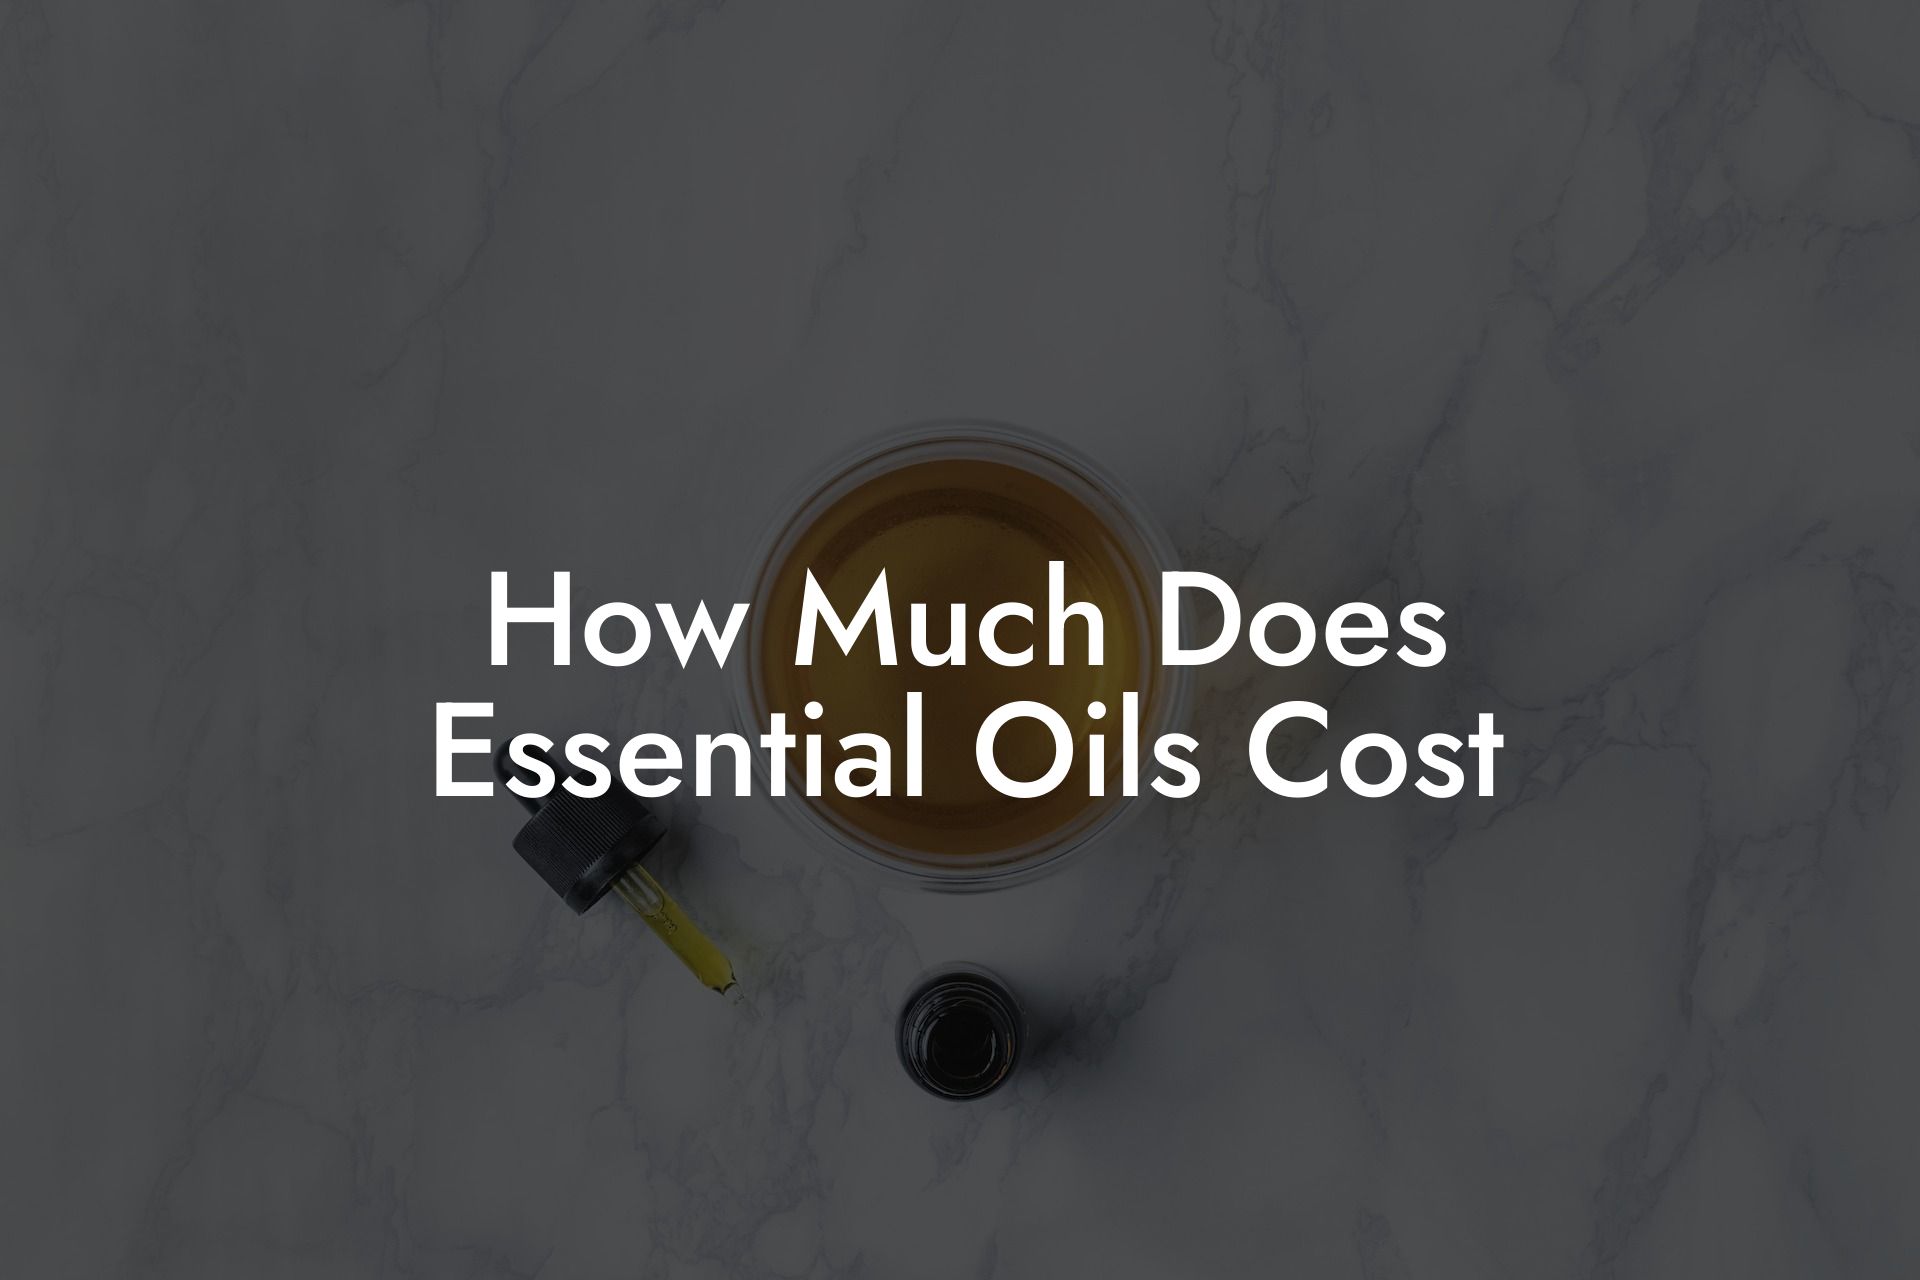 How Much Does Essential Oils Cost